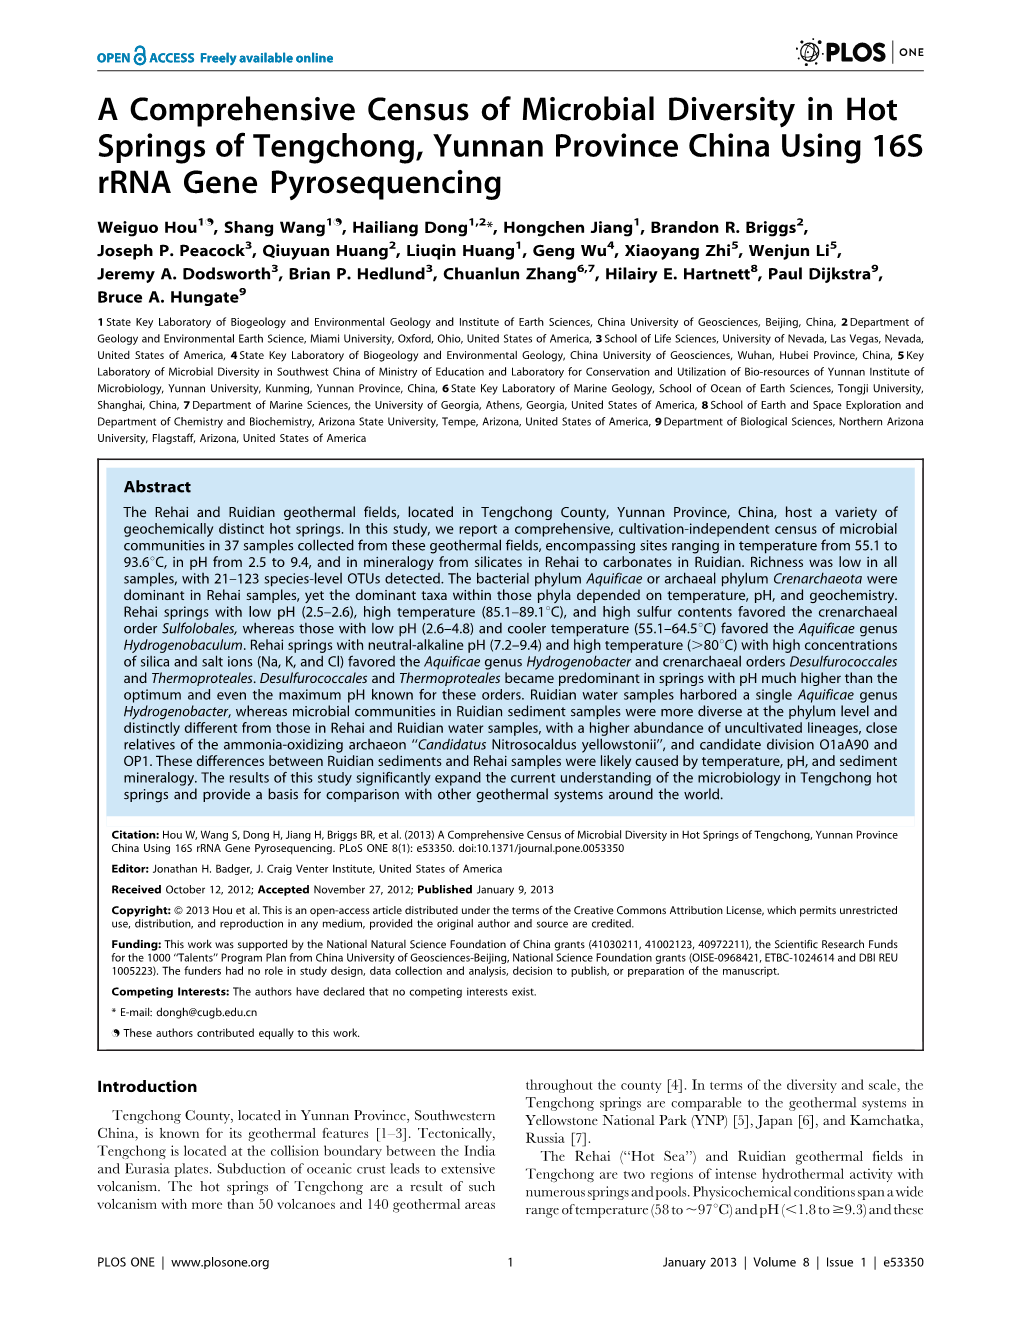 A Comprehensive Census of Microbial Diversity in Hot Springs of Tengchong, Yunnan Province China Using 16S Rrna Gene Pyrosequencing